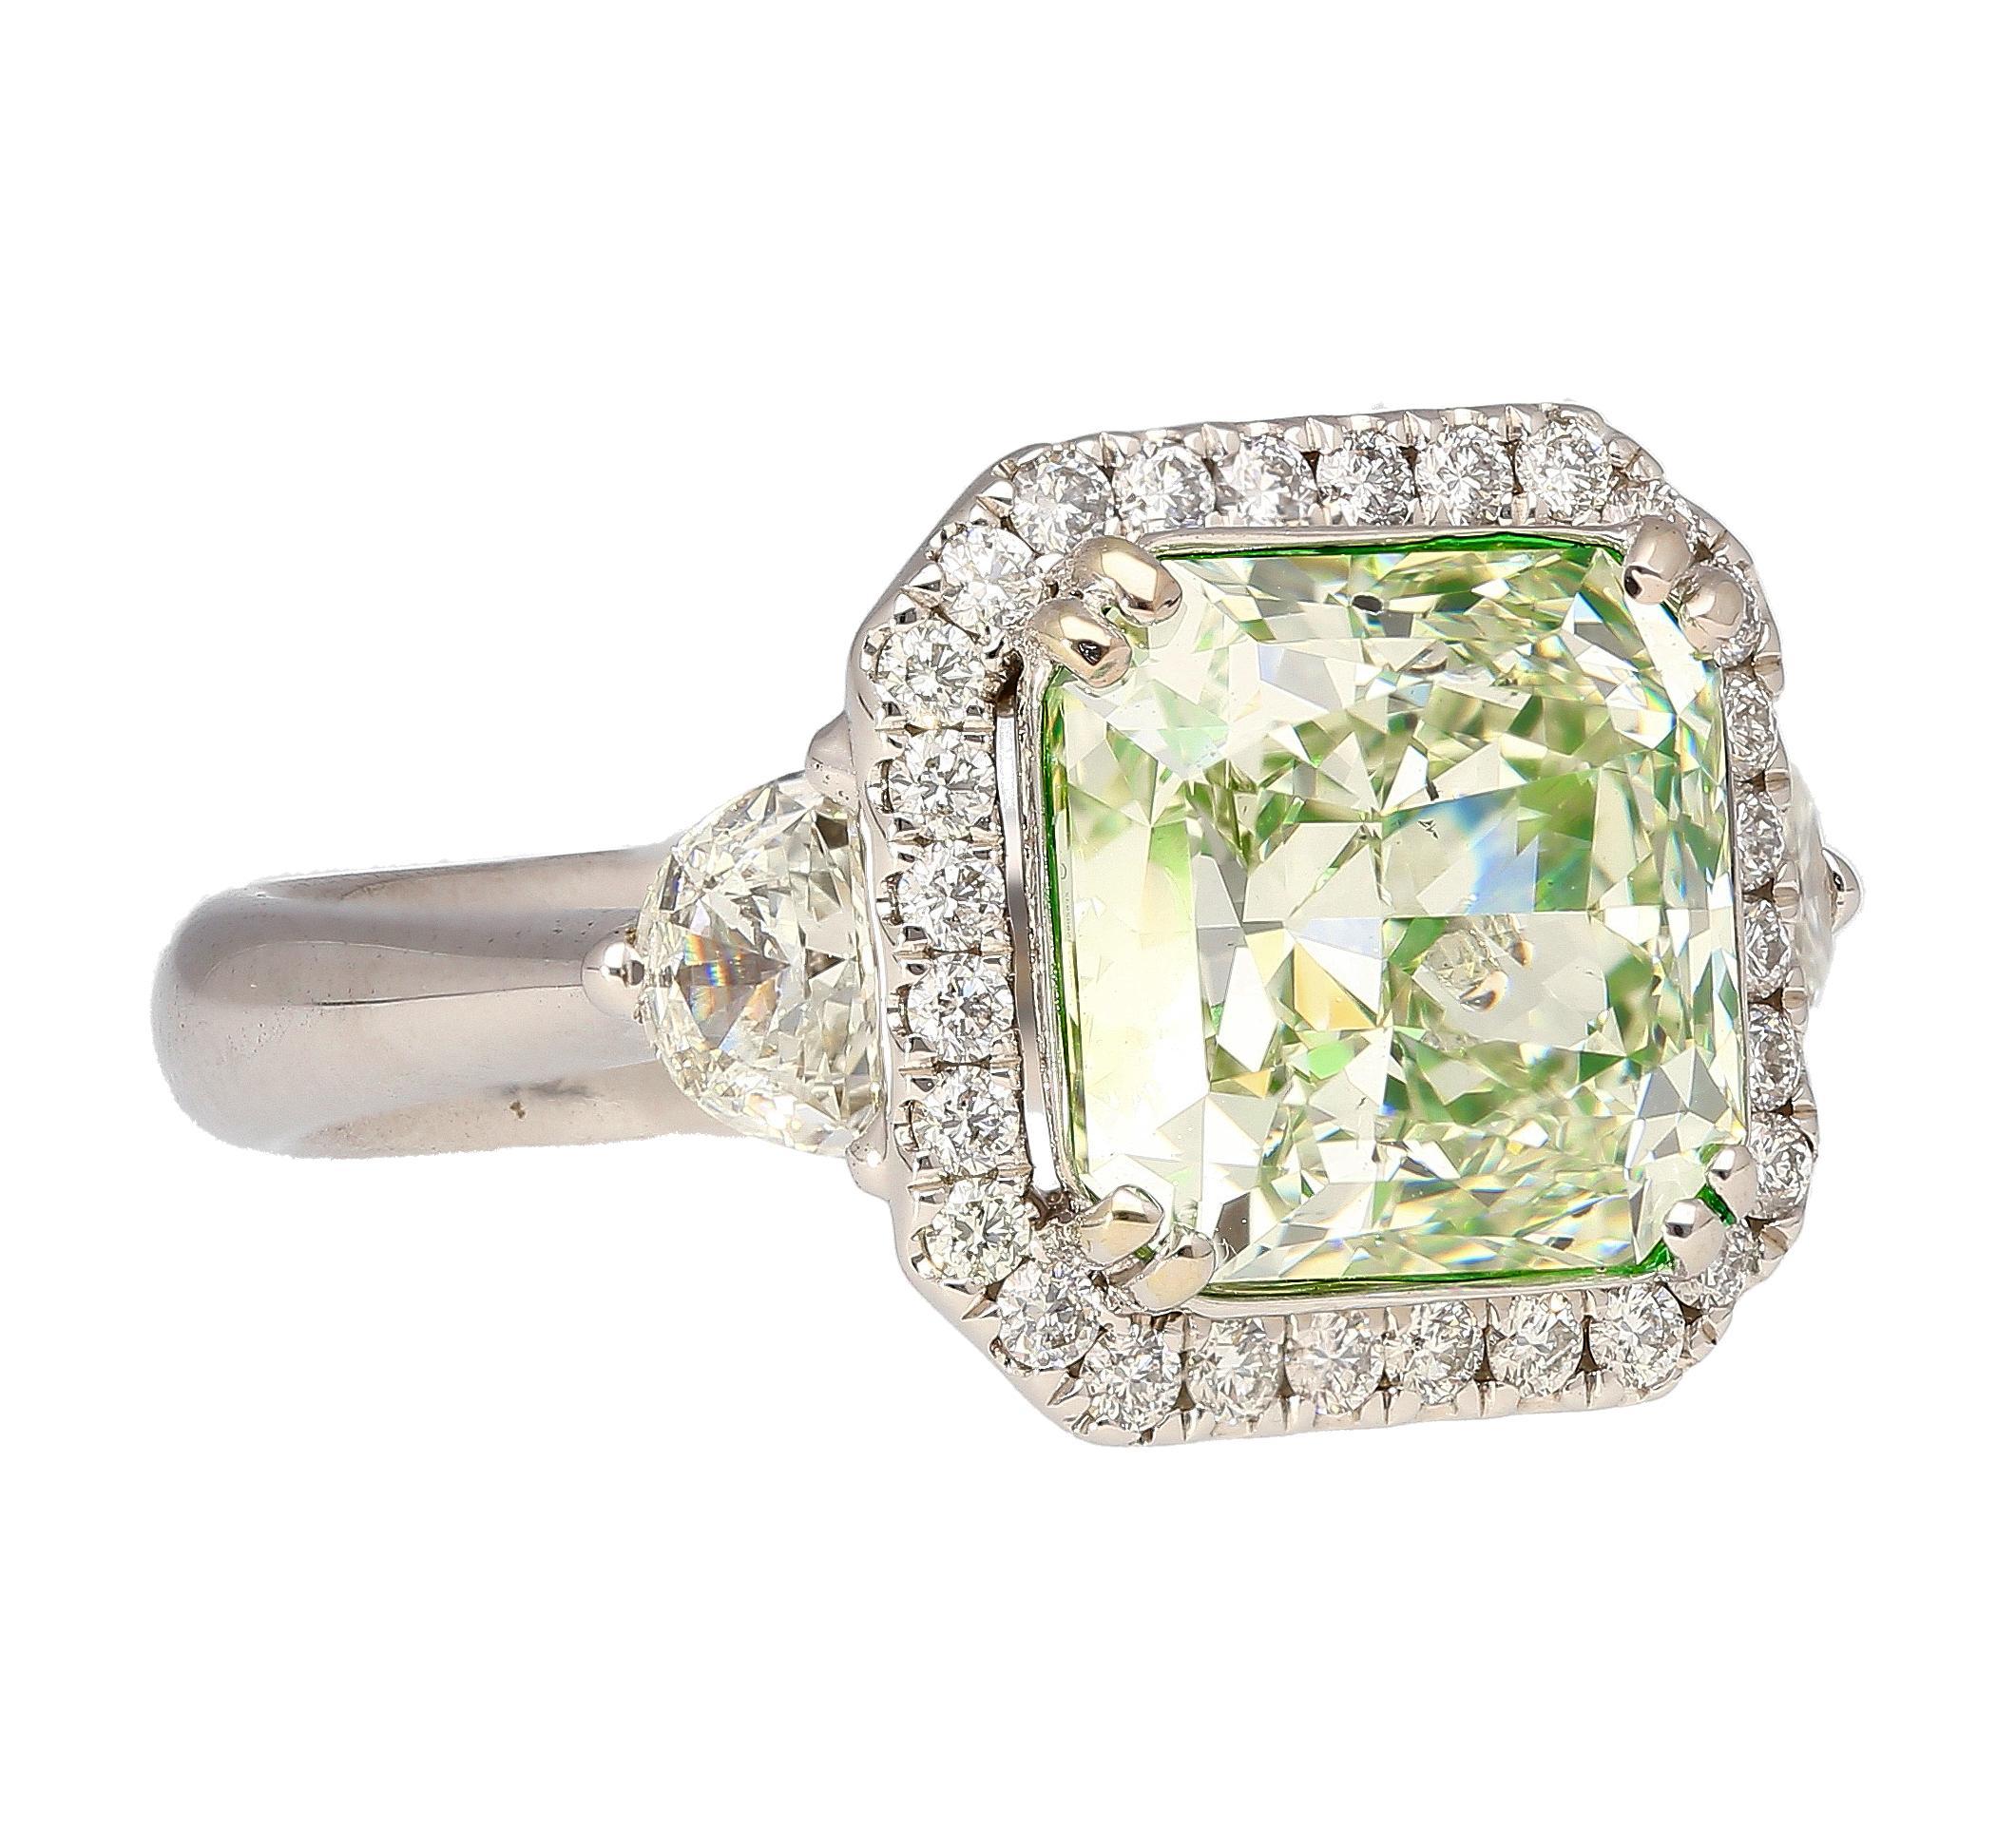 Jewelry Details:
Item Type: Diamond Ring
Metal Type: 18K White Gold
Weight: 7.27 grams
Ring Size: 6
Center Stone Details:
Gemstone Type: Diamond
Shape: Radiant Cut
Carat: 4.26 Carats
Color: Fancy Yellowish Green
Clarity: SI1
Certification: GIA